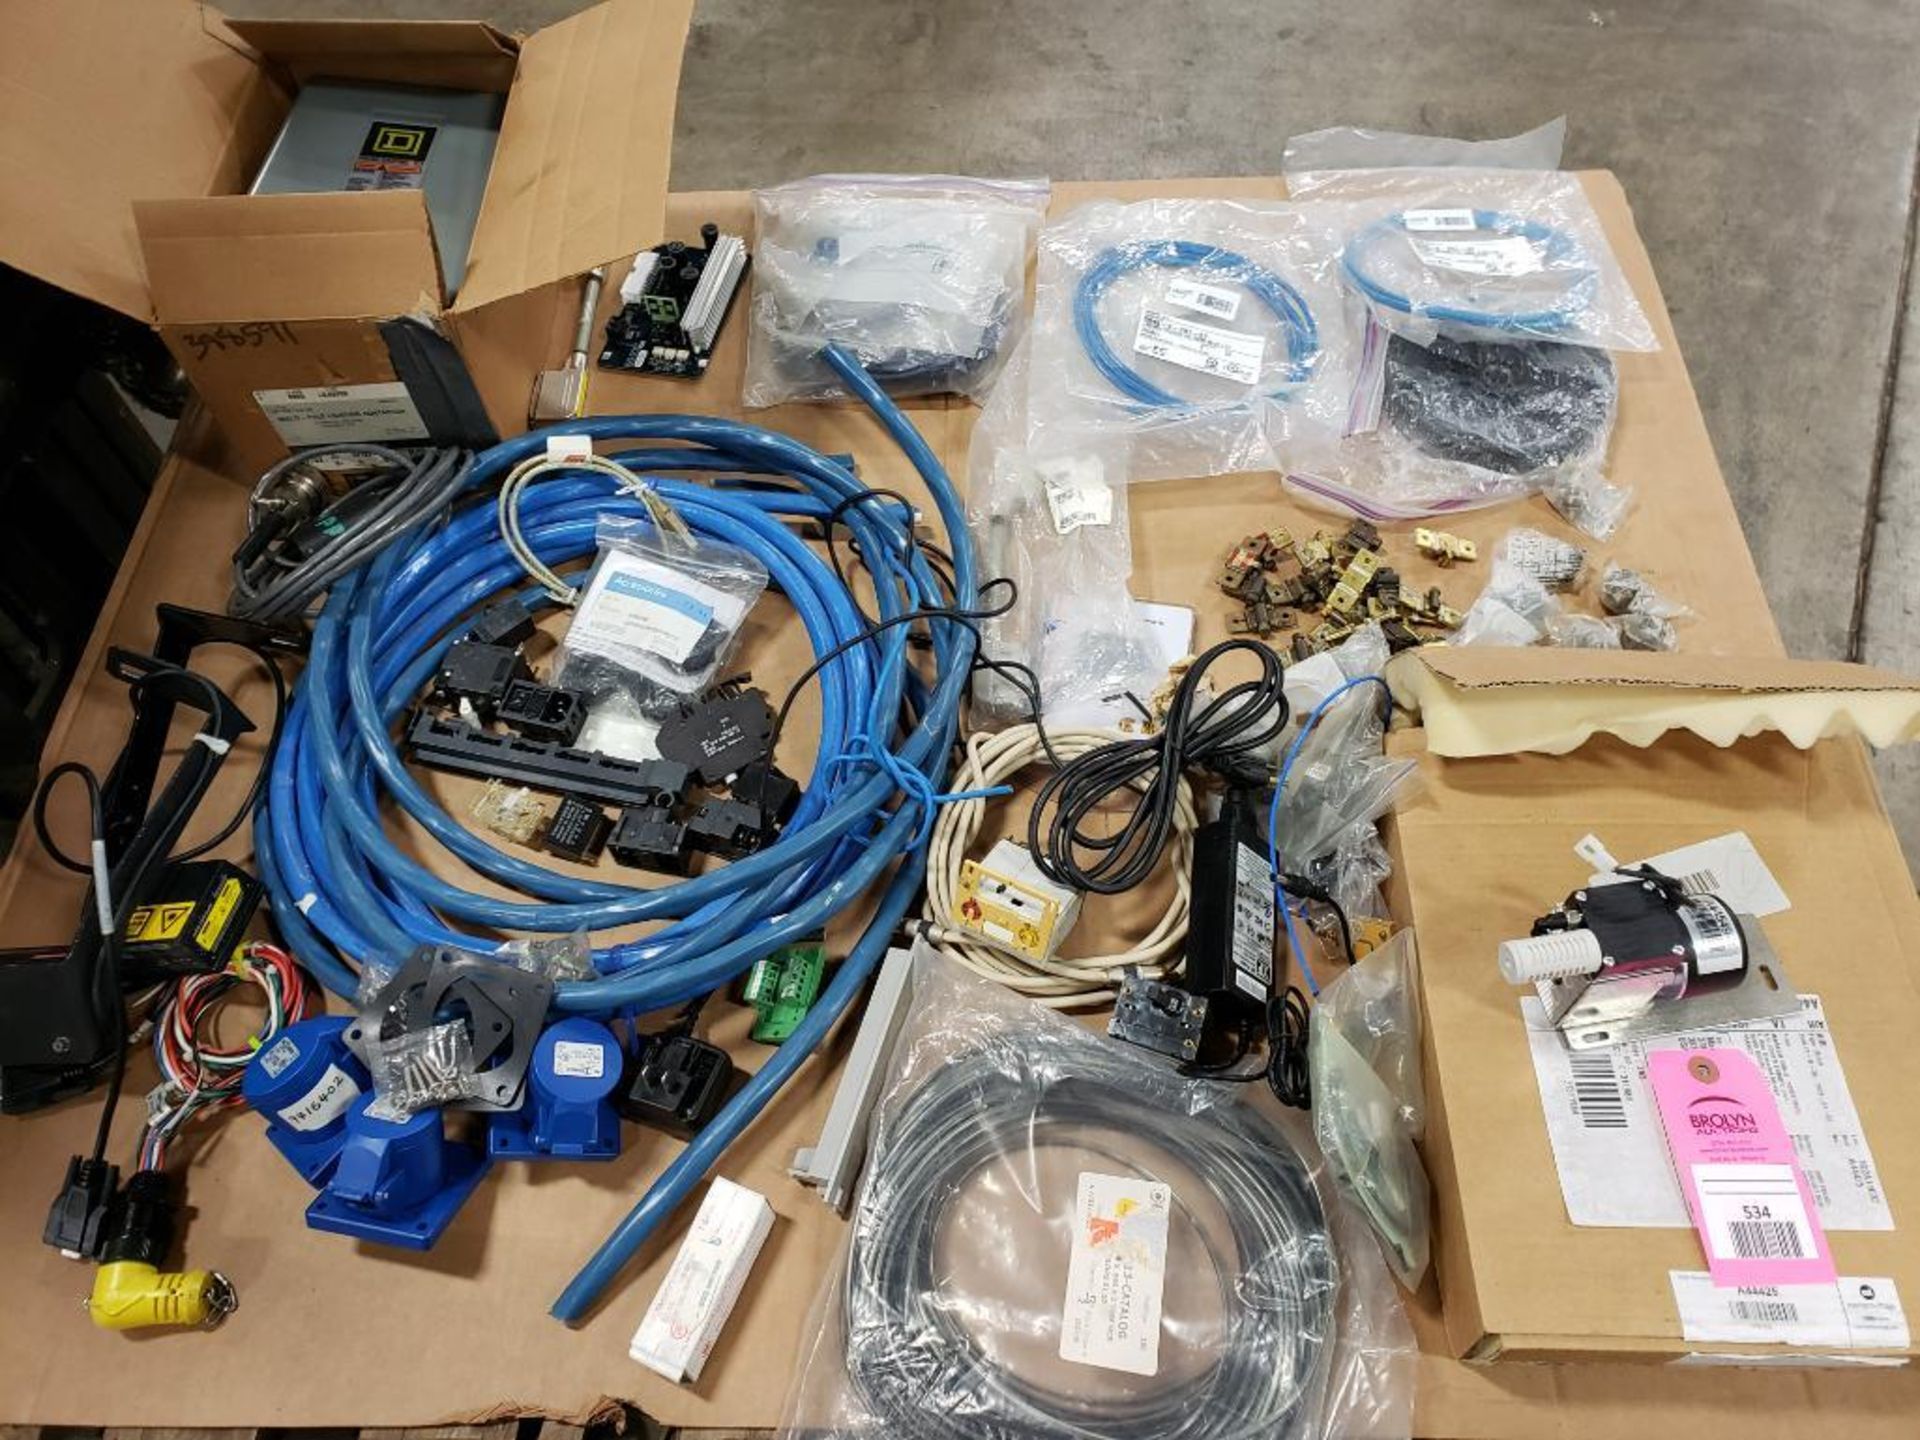 Pallet of Assorted electrical and flow control. Pump, relays, plugs.